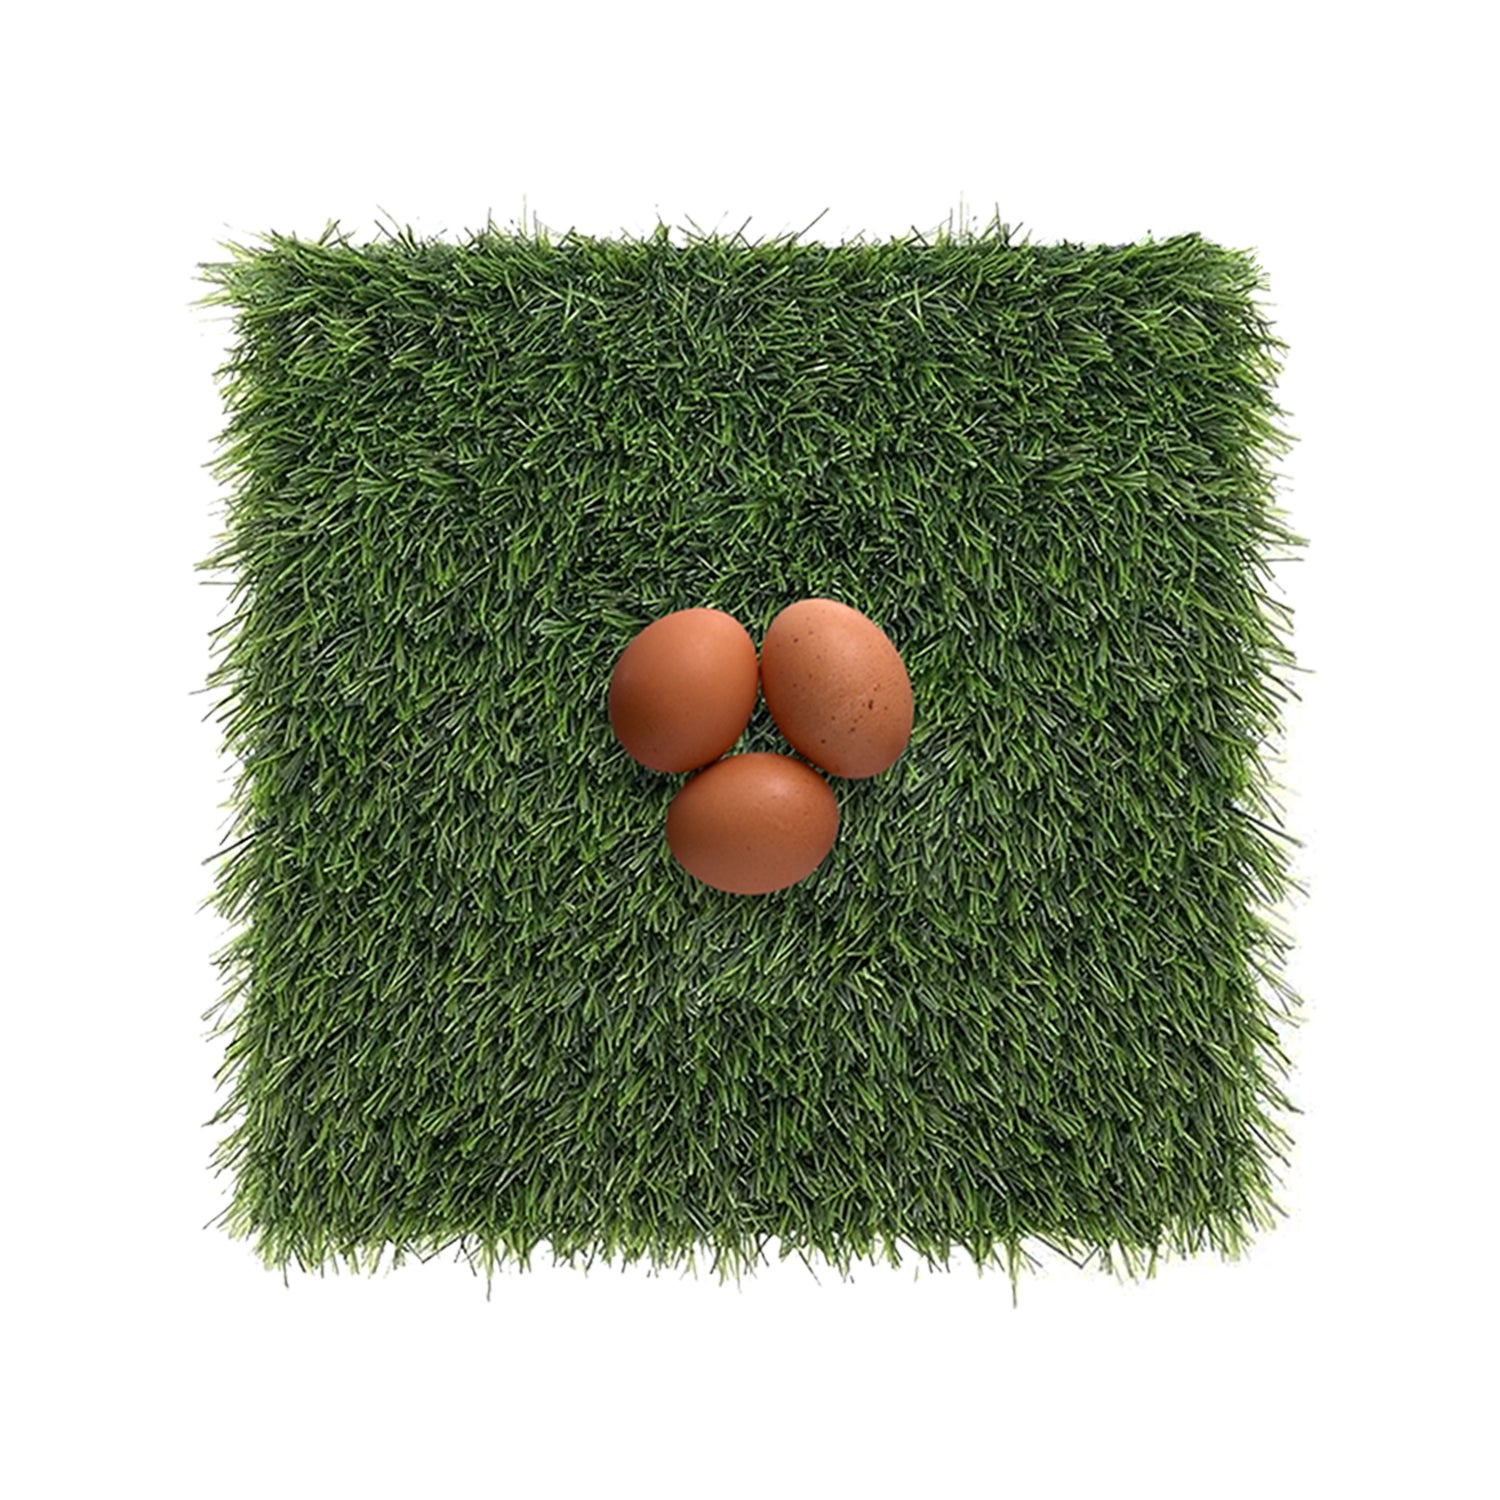 Our turf nest box liners are extra thick, and easy to clean.